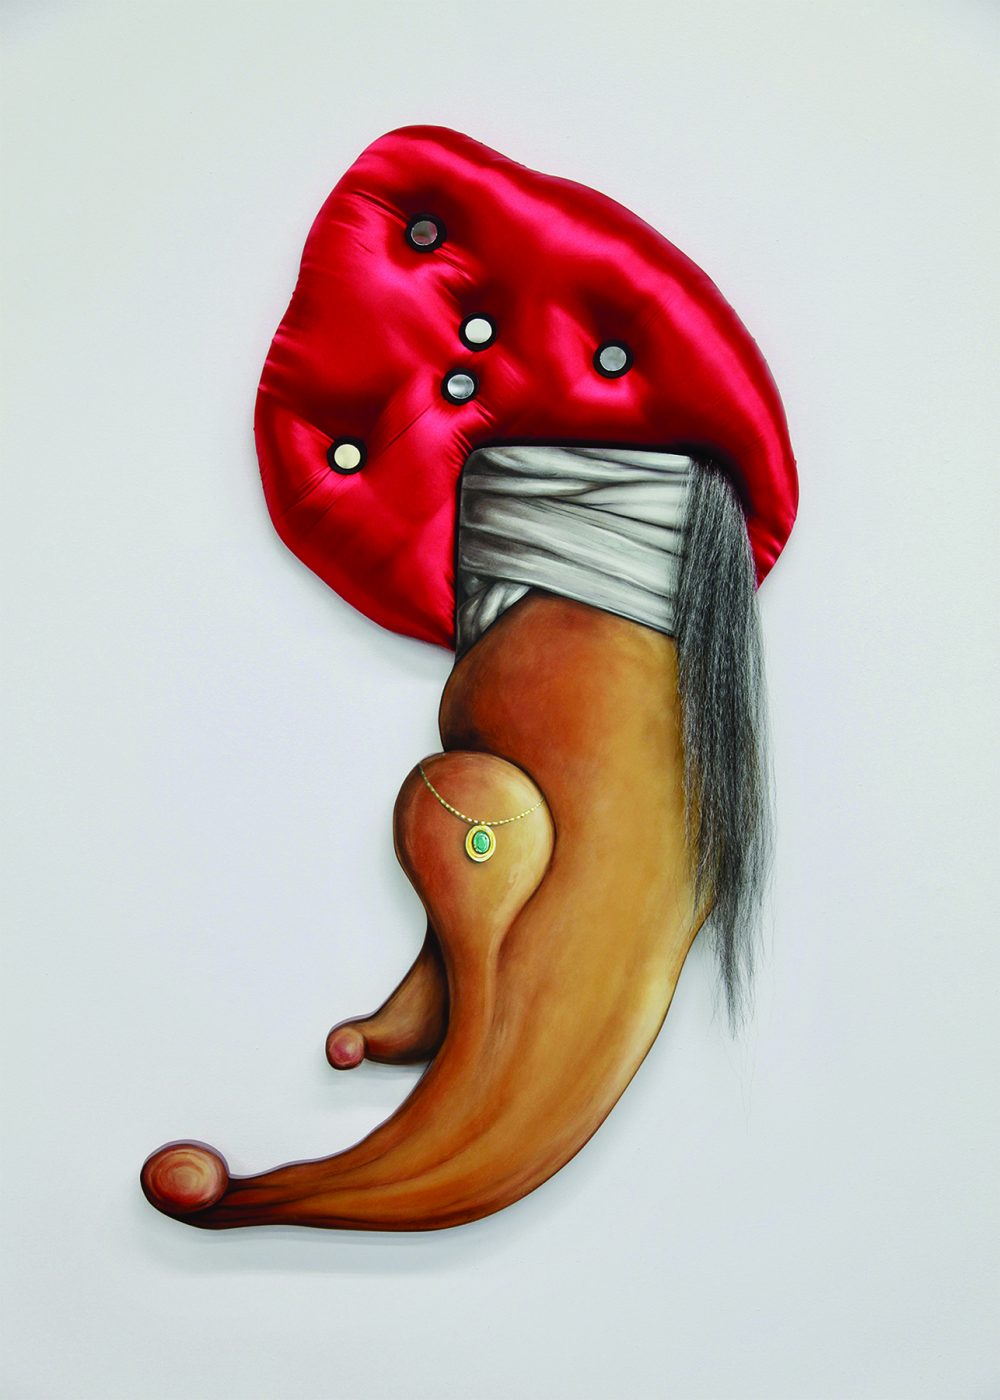 Mixed media sculpture hangs on a white gallery wall. The lower half of the artwork is painted wood and depicts a jeweled necklace and white wrapped fabric. The upper part of the piece is a padded turban like shape made of shiny red fabric, with white buttons imbedded in it. A tail like drape of artificial grey hair is draped on the right side of the object.